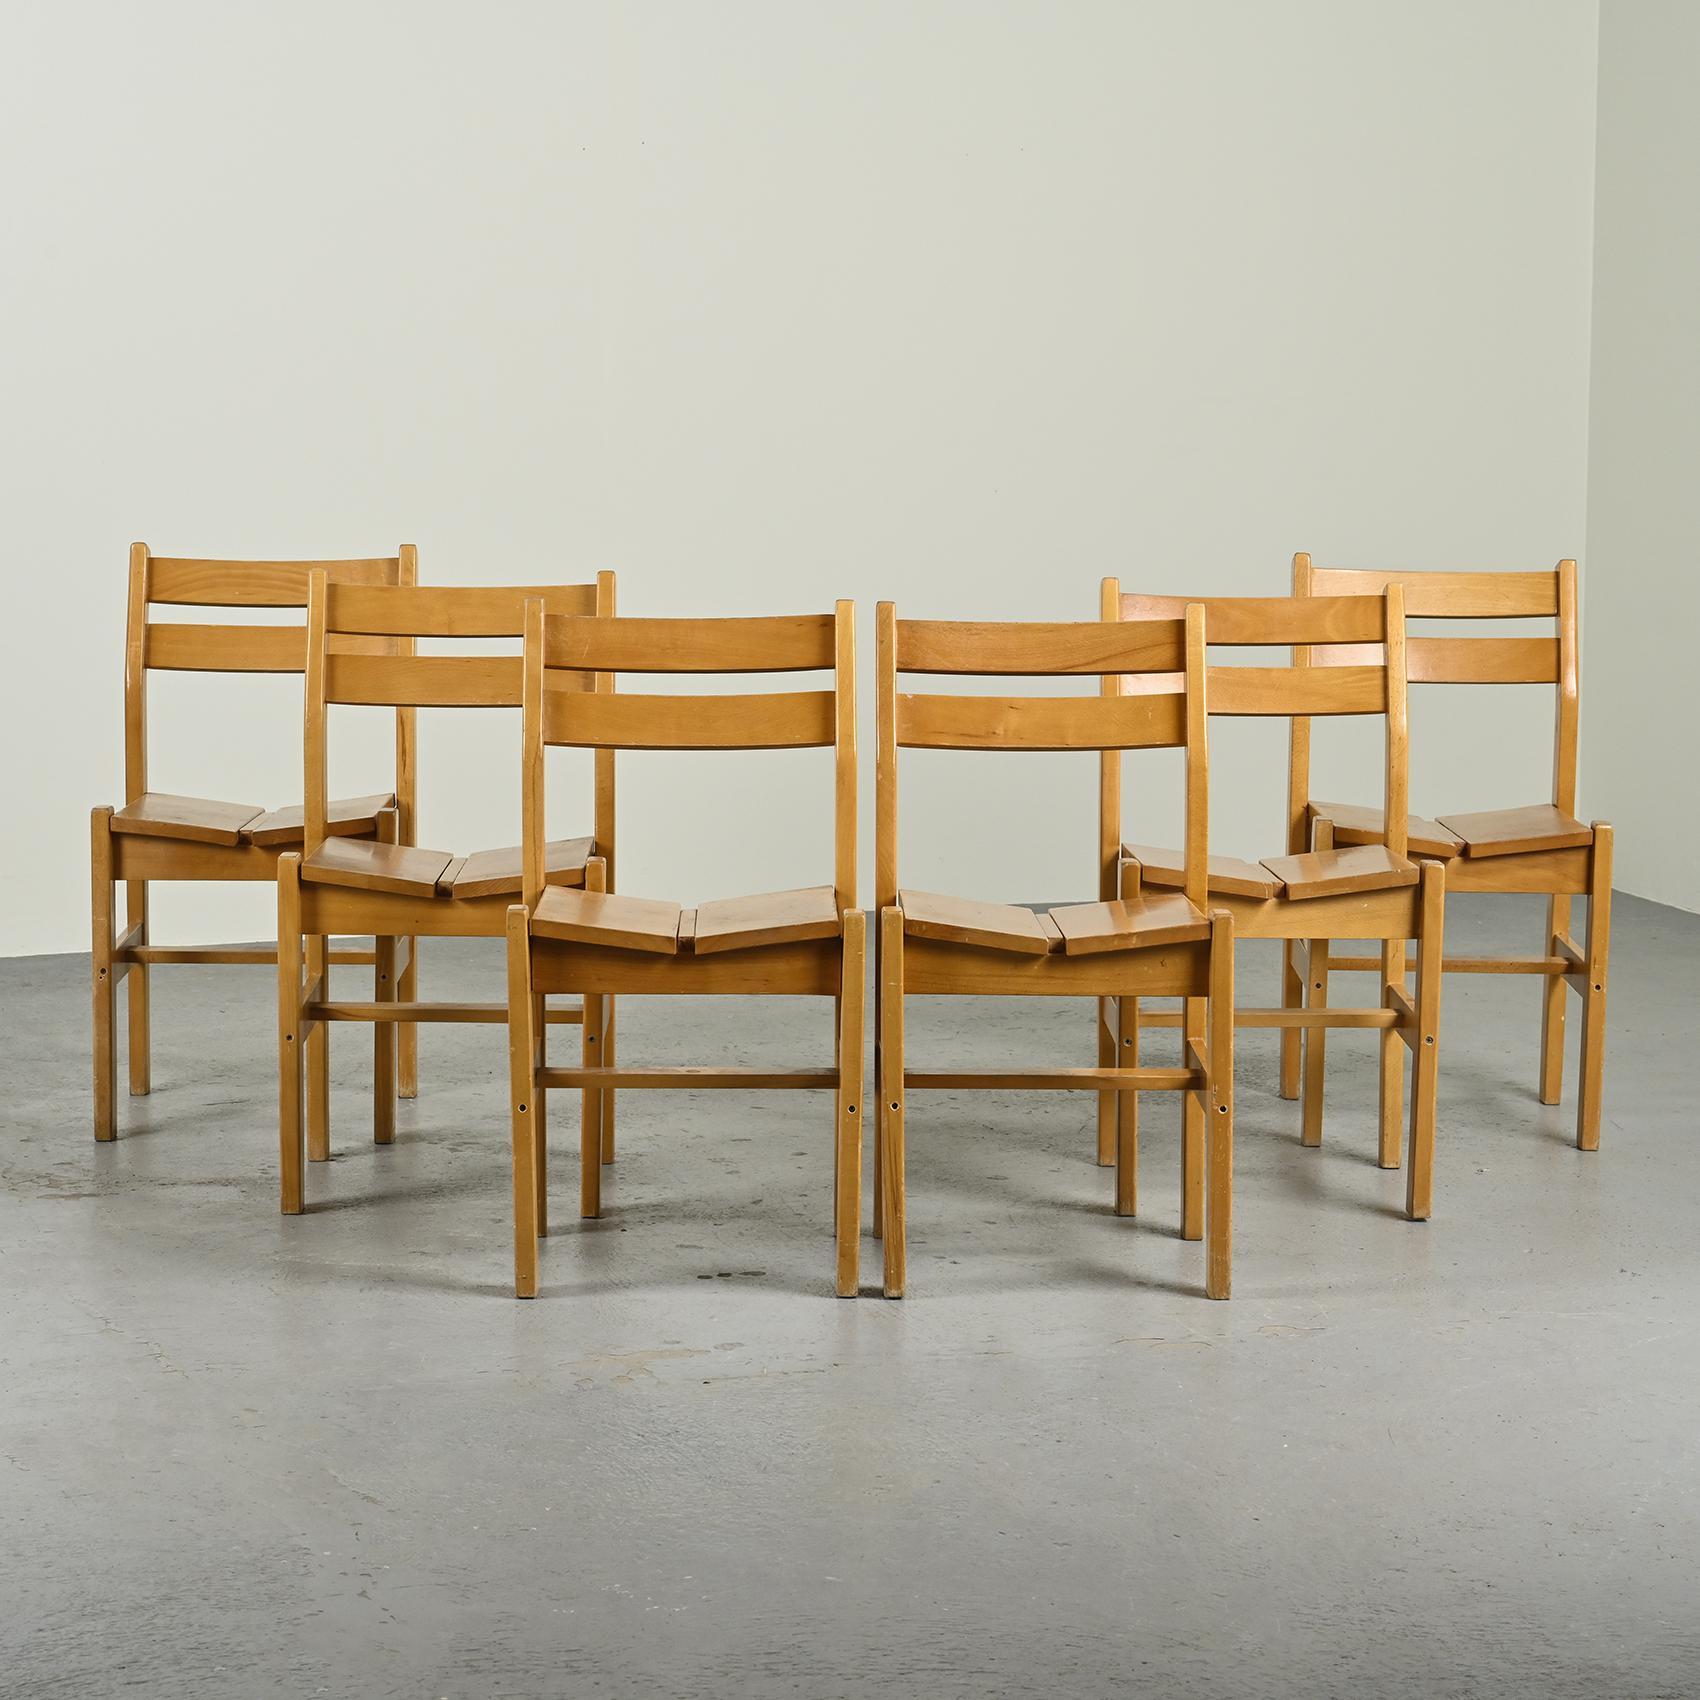 These chairs were selected by Charlotte PERRIAND for Les Arcs Ski Resort.

Set of six chairs in solid elm wood specially chosen for the ski resort Les Arcs.

The seat has two cut corners, and the backrest is openwork.

Provenance: La Cascade